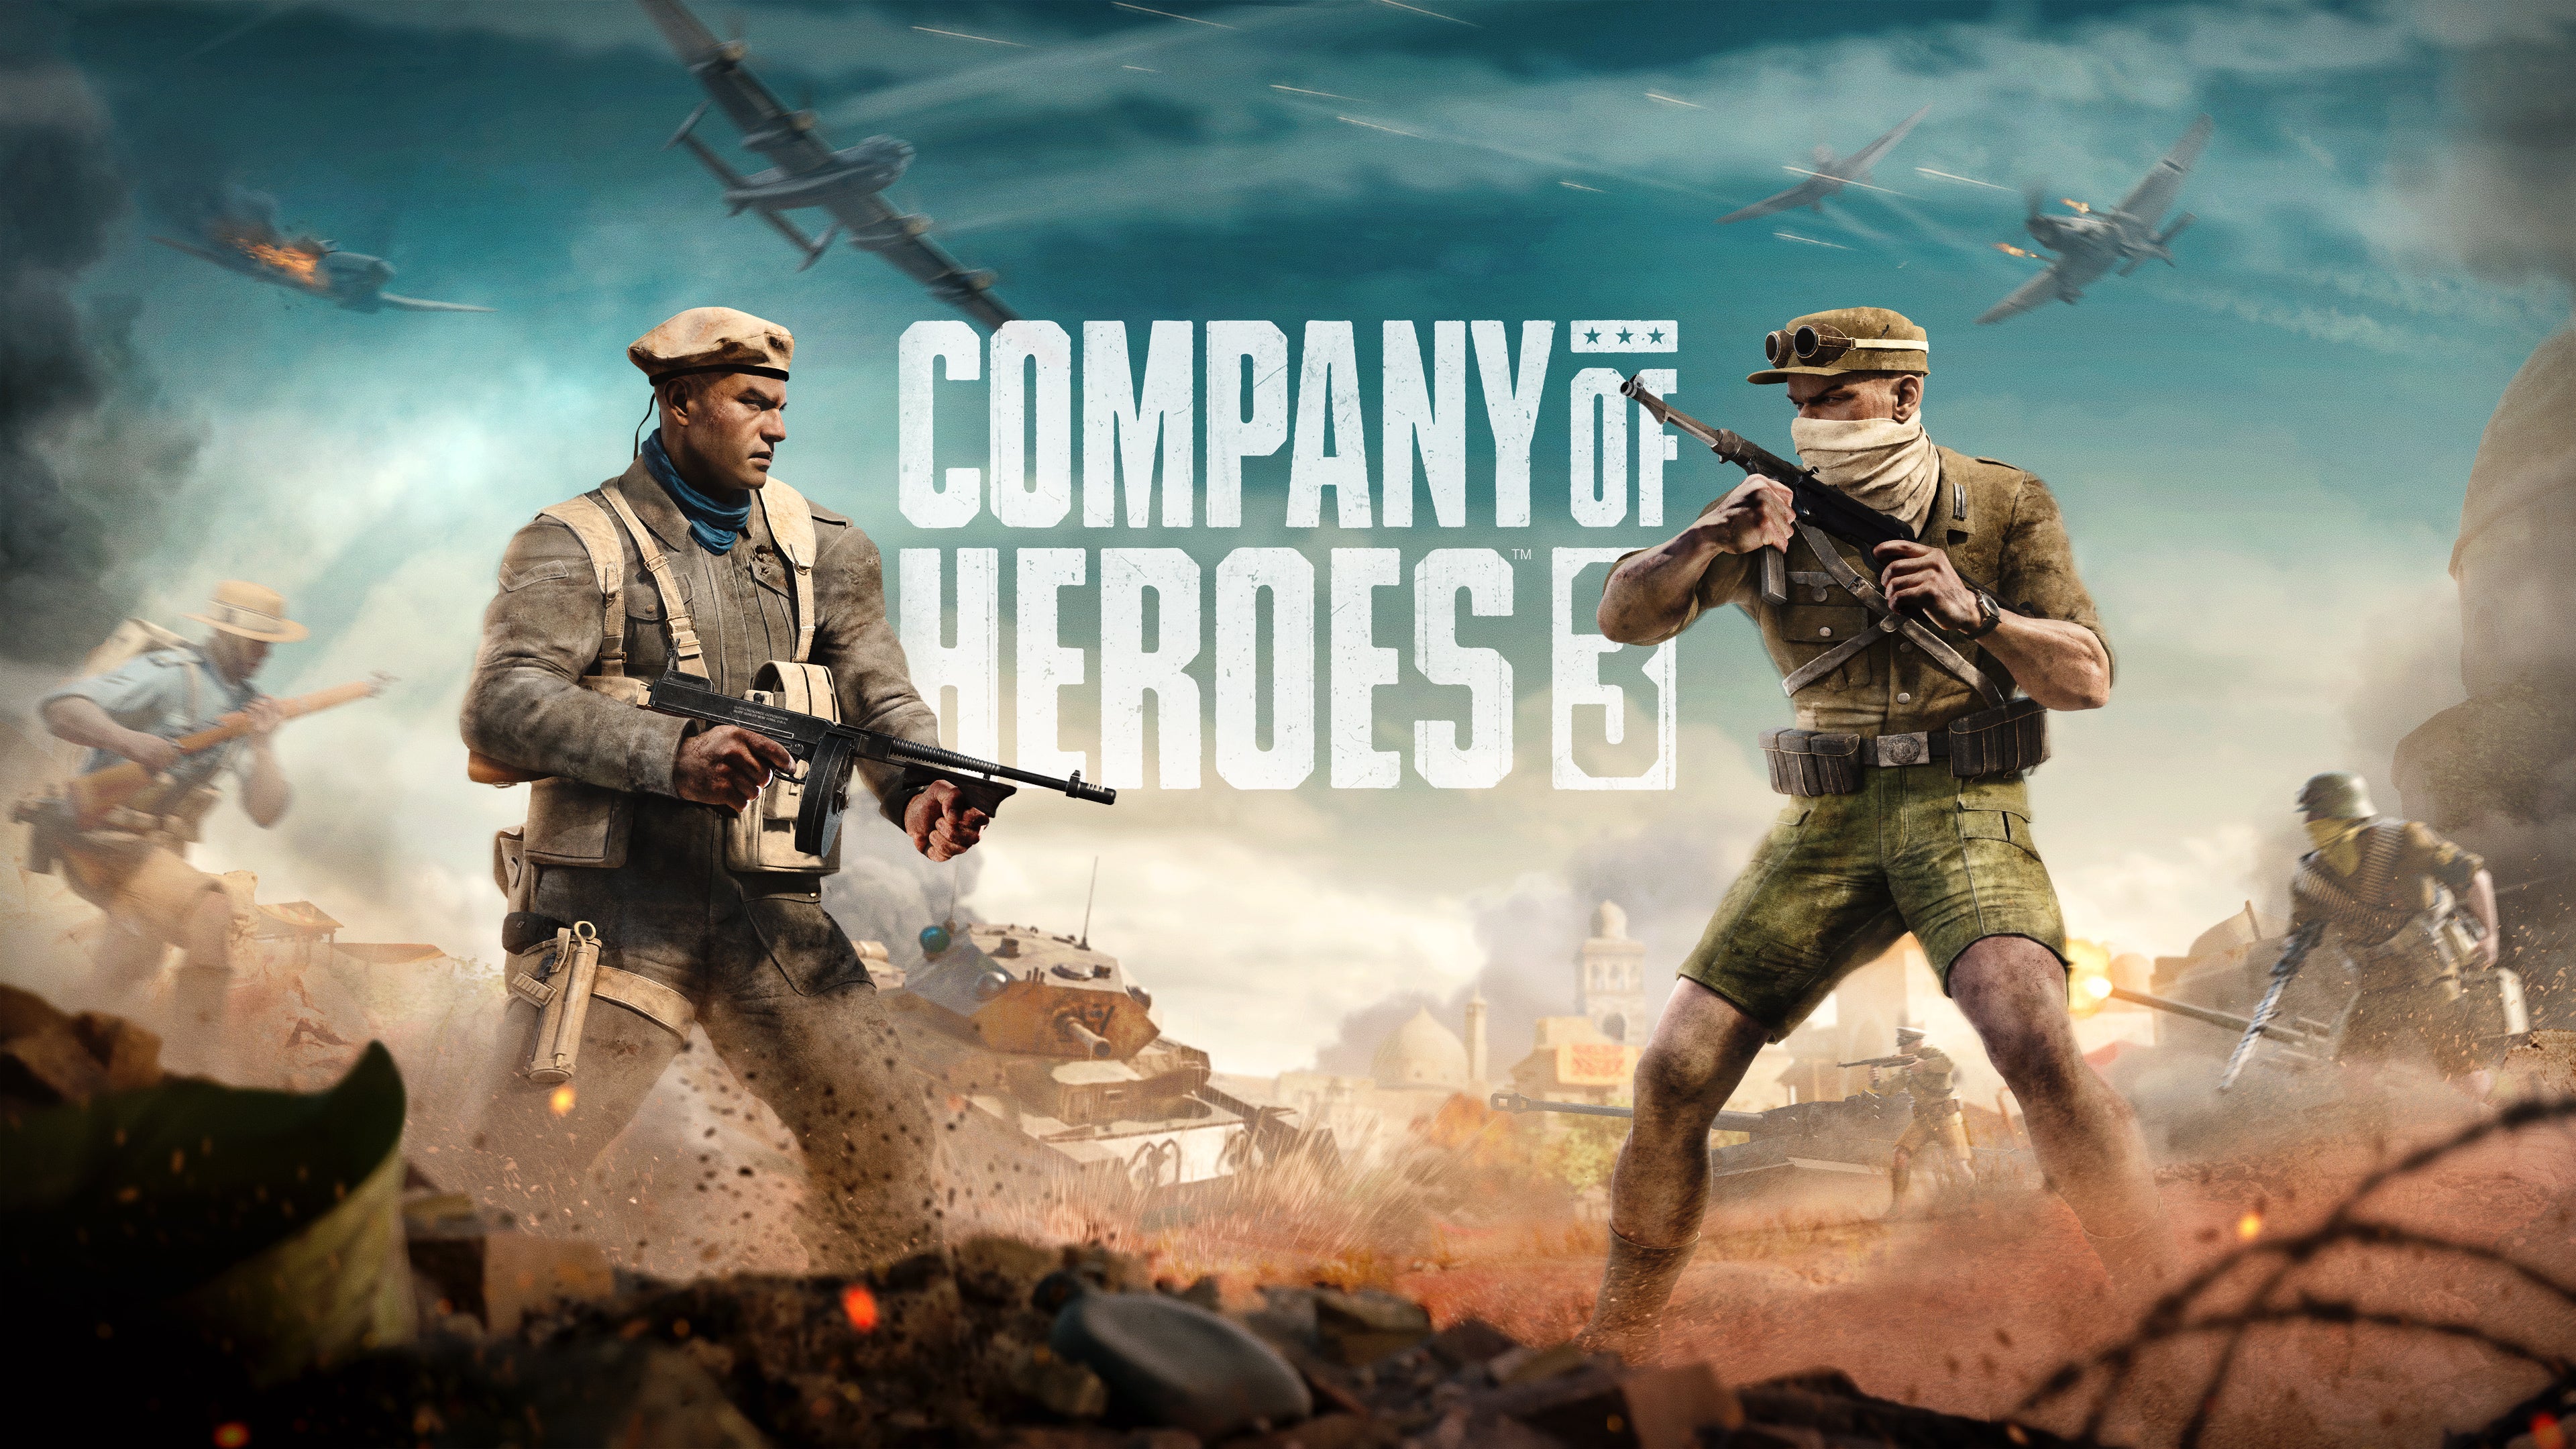 Image for Company of Heroes 3 will eschew the notion of a "war without hate"